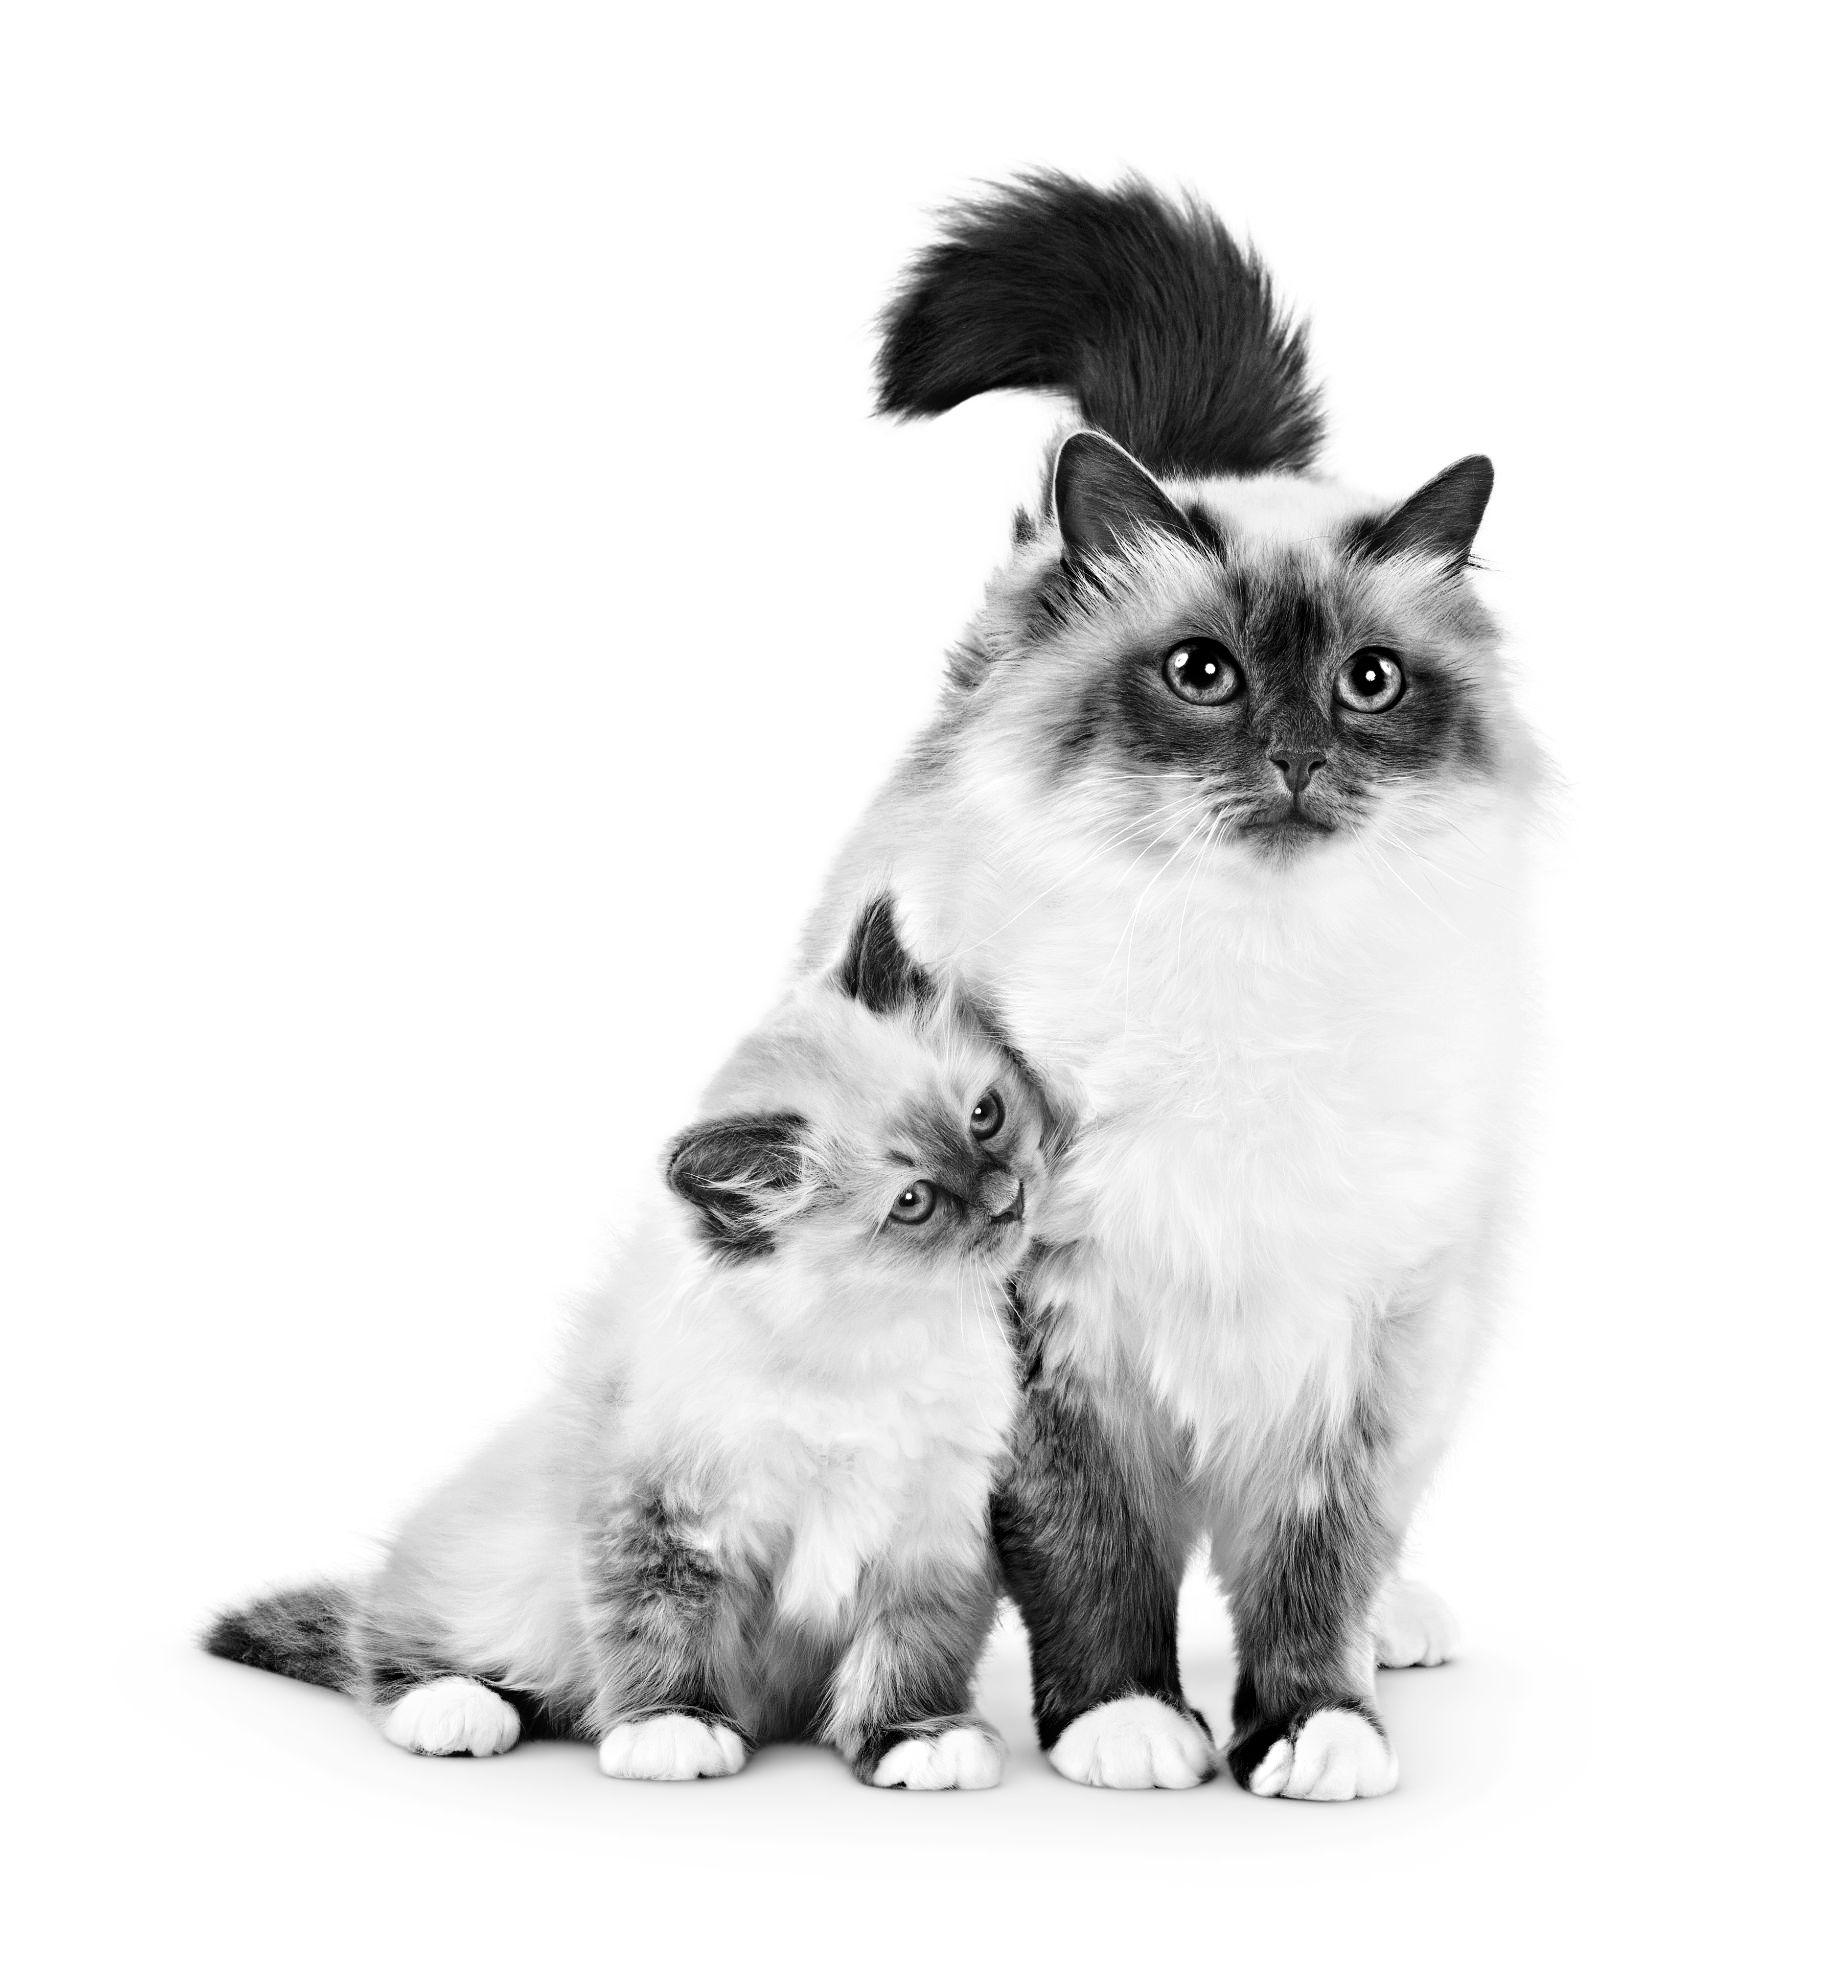 Sacred Birman kitten and mother sitting together